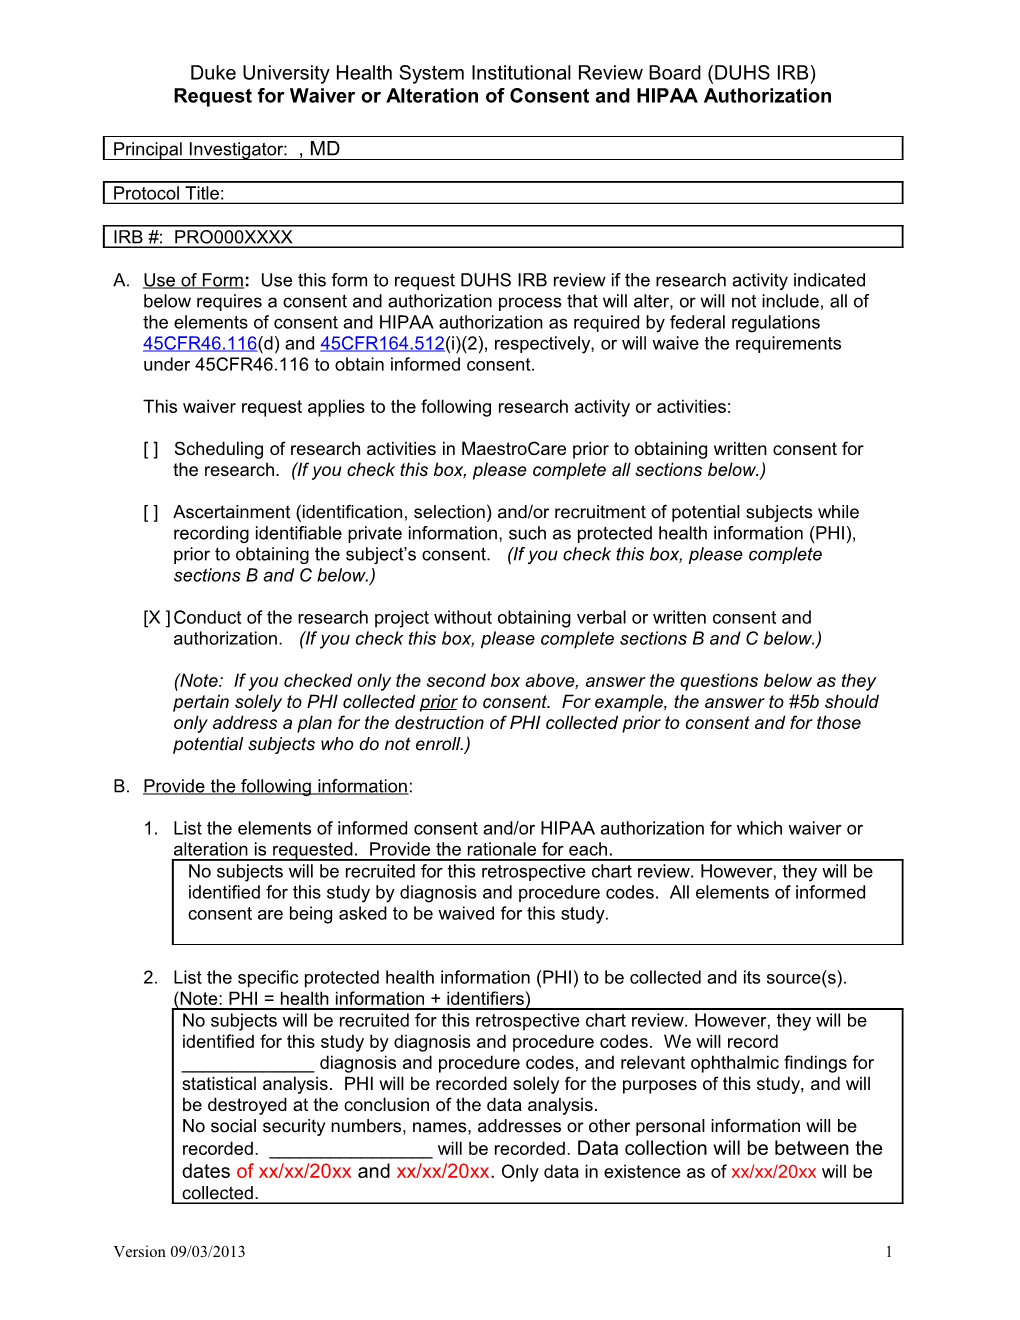 Request for Waiver Or Alteration of Consent and Authorization DRAFT